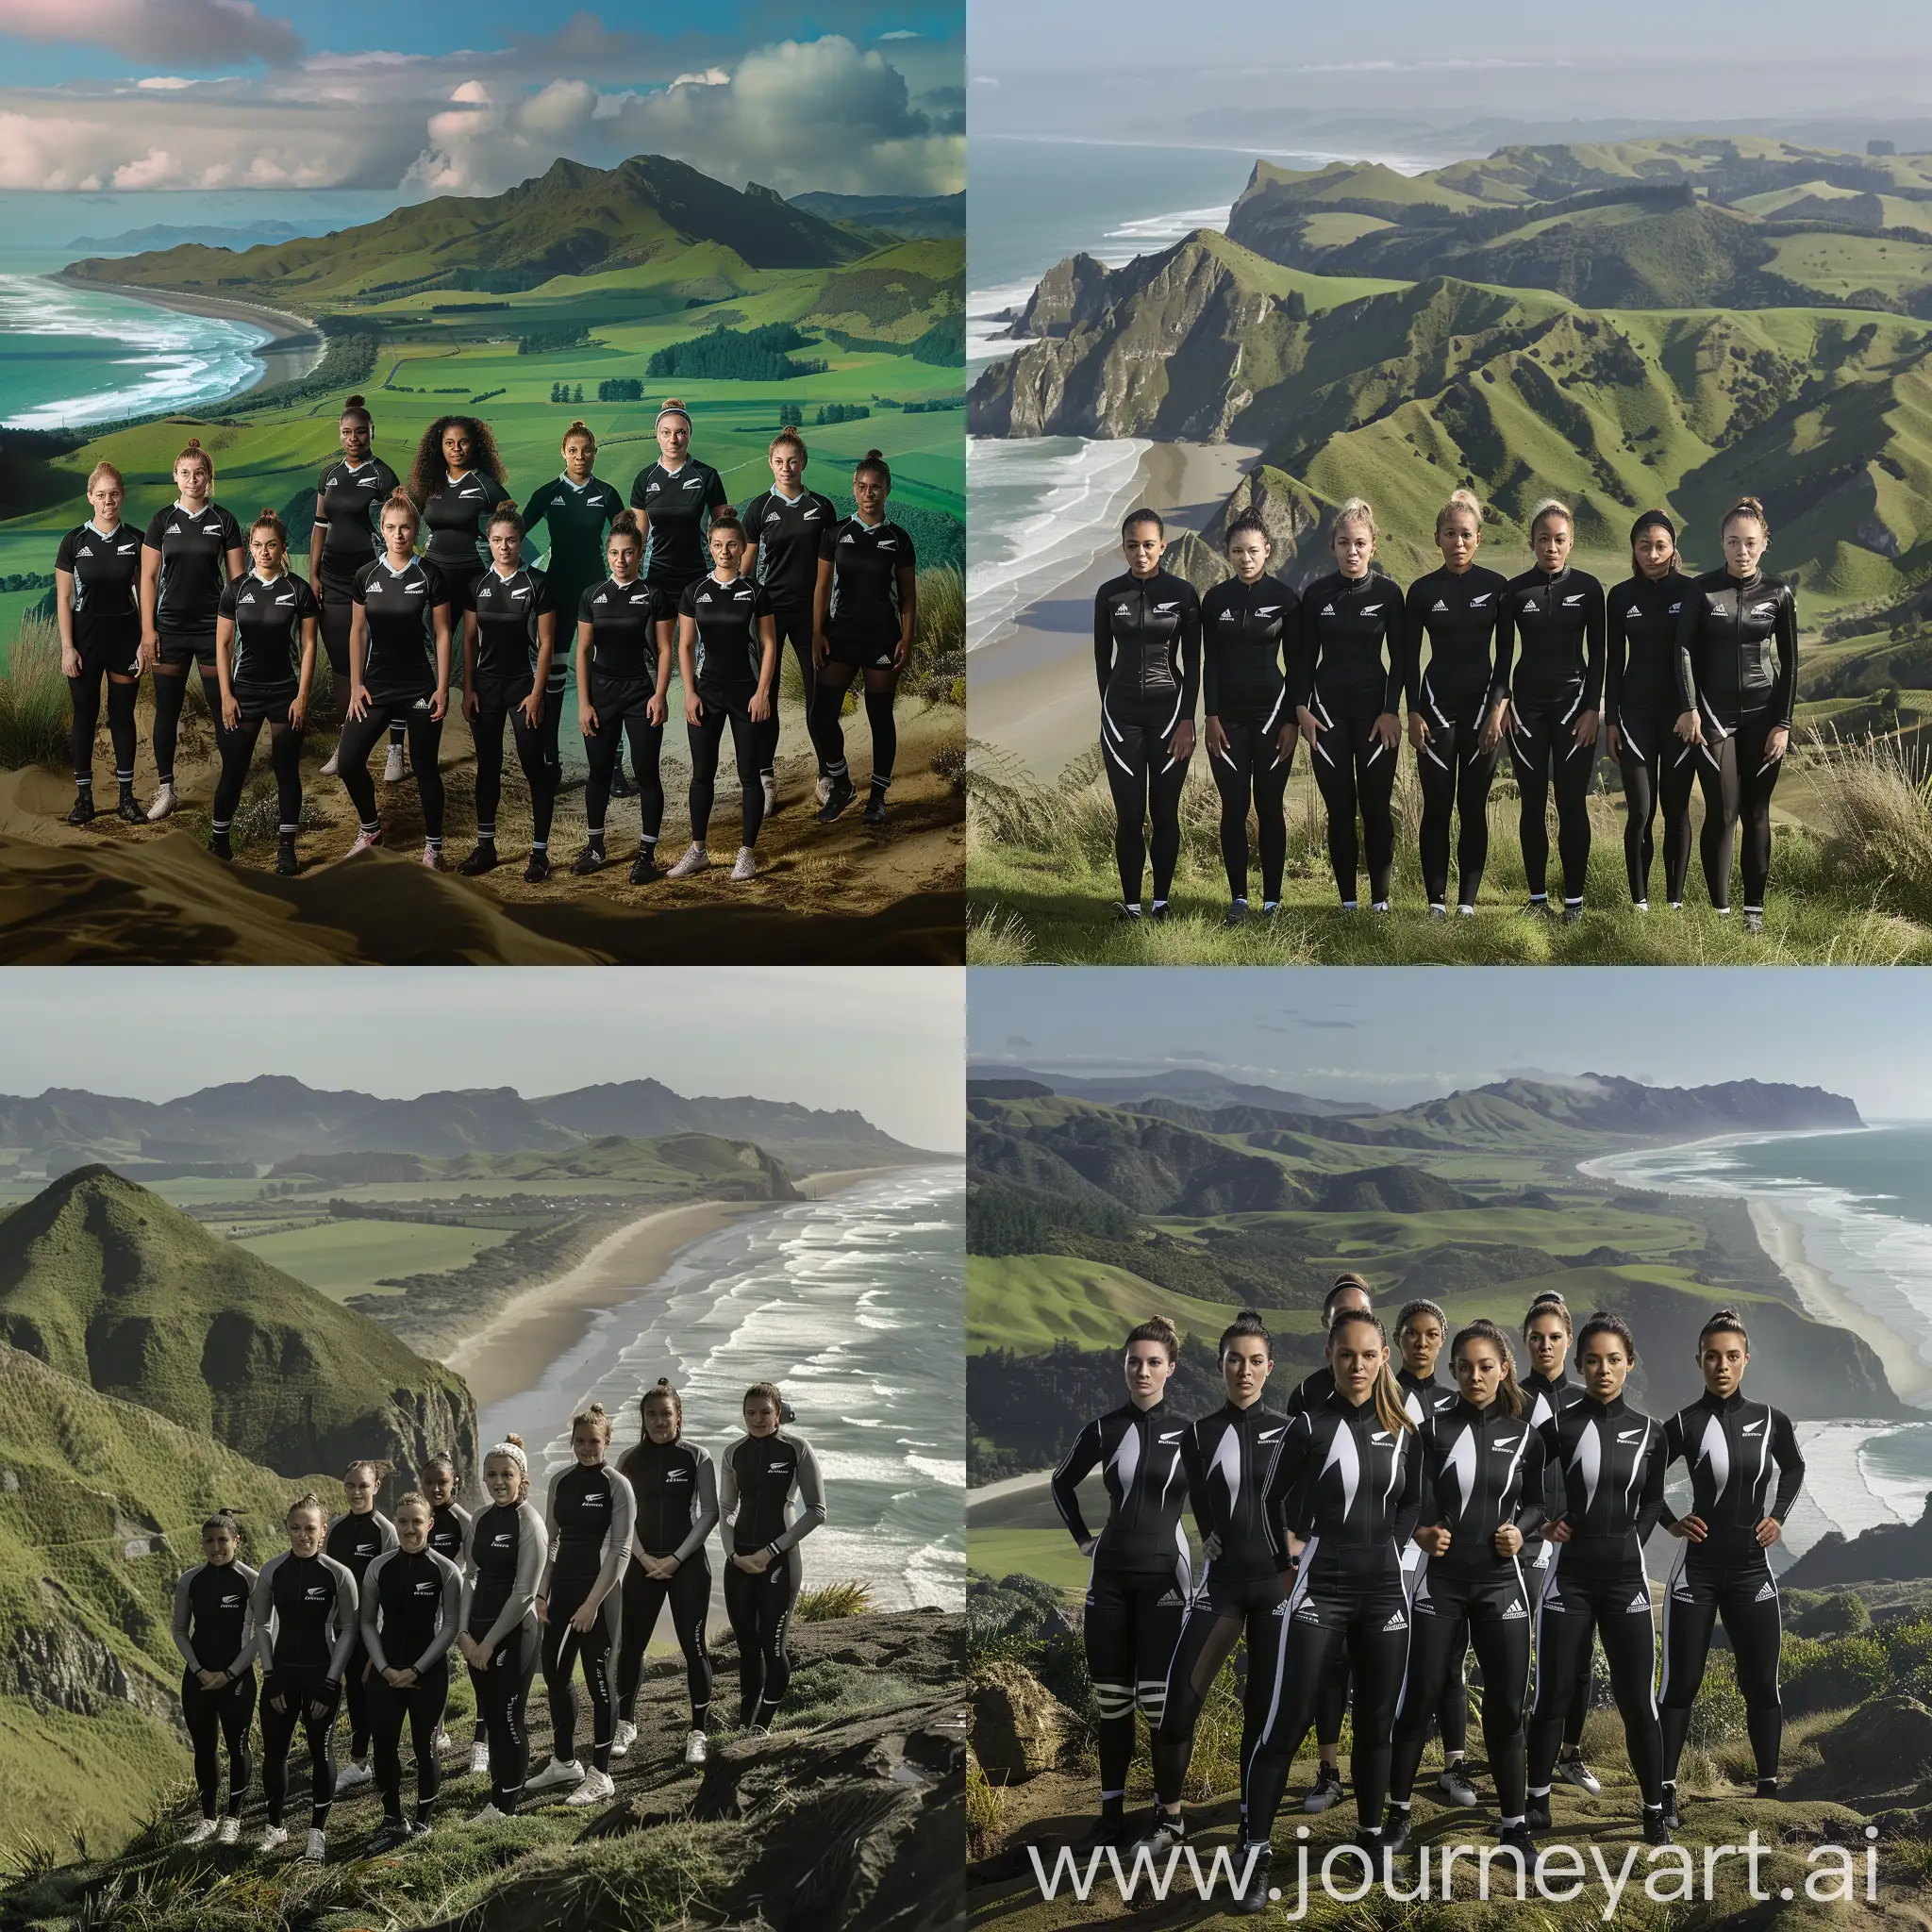 Black-Ferns-Womens-7s-Team-2023-Strength-Unity-and-Determination-Amidst-New-Zealands-Breathtaking-Landscape